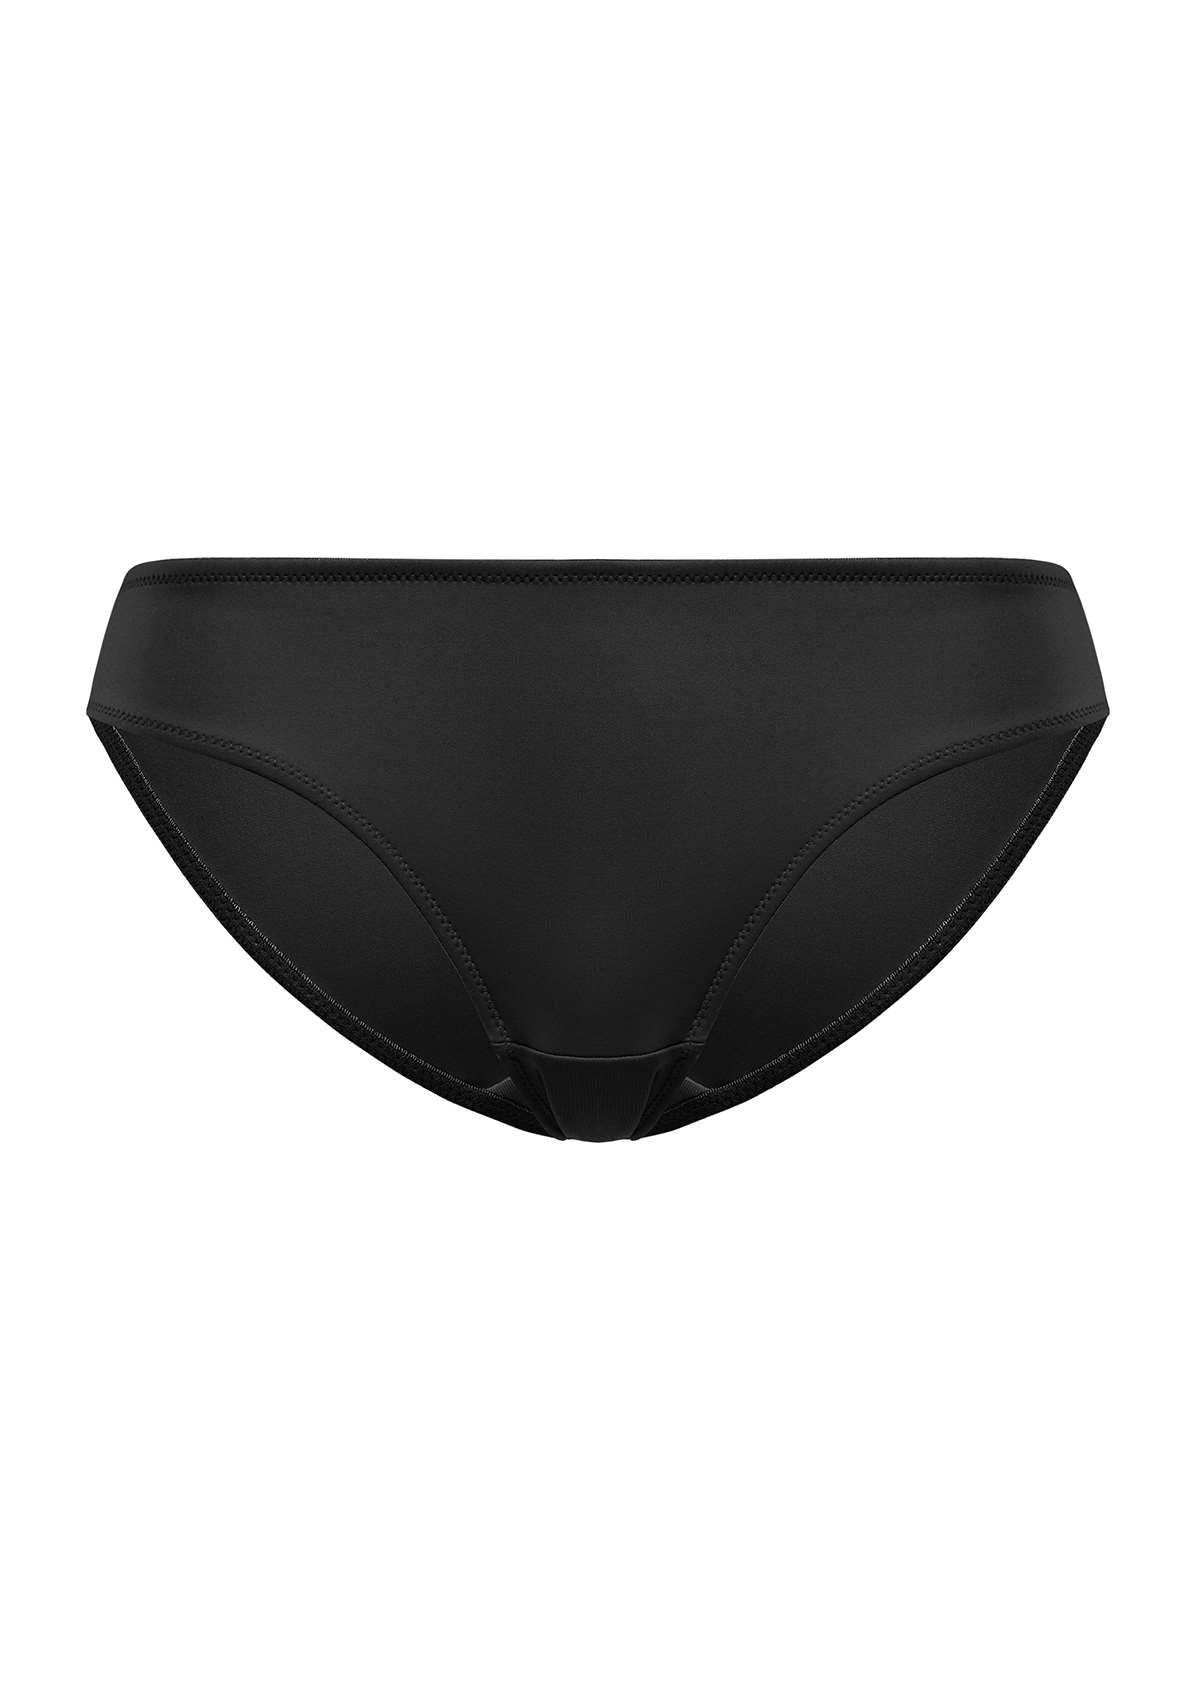 HSIA Patricia Smooth Classic Soft Stretch Panty - Everyday Comfort - M / Black